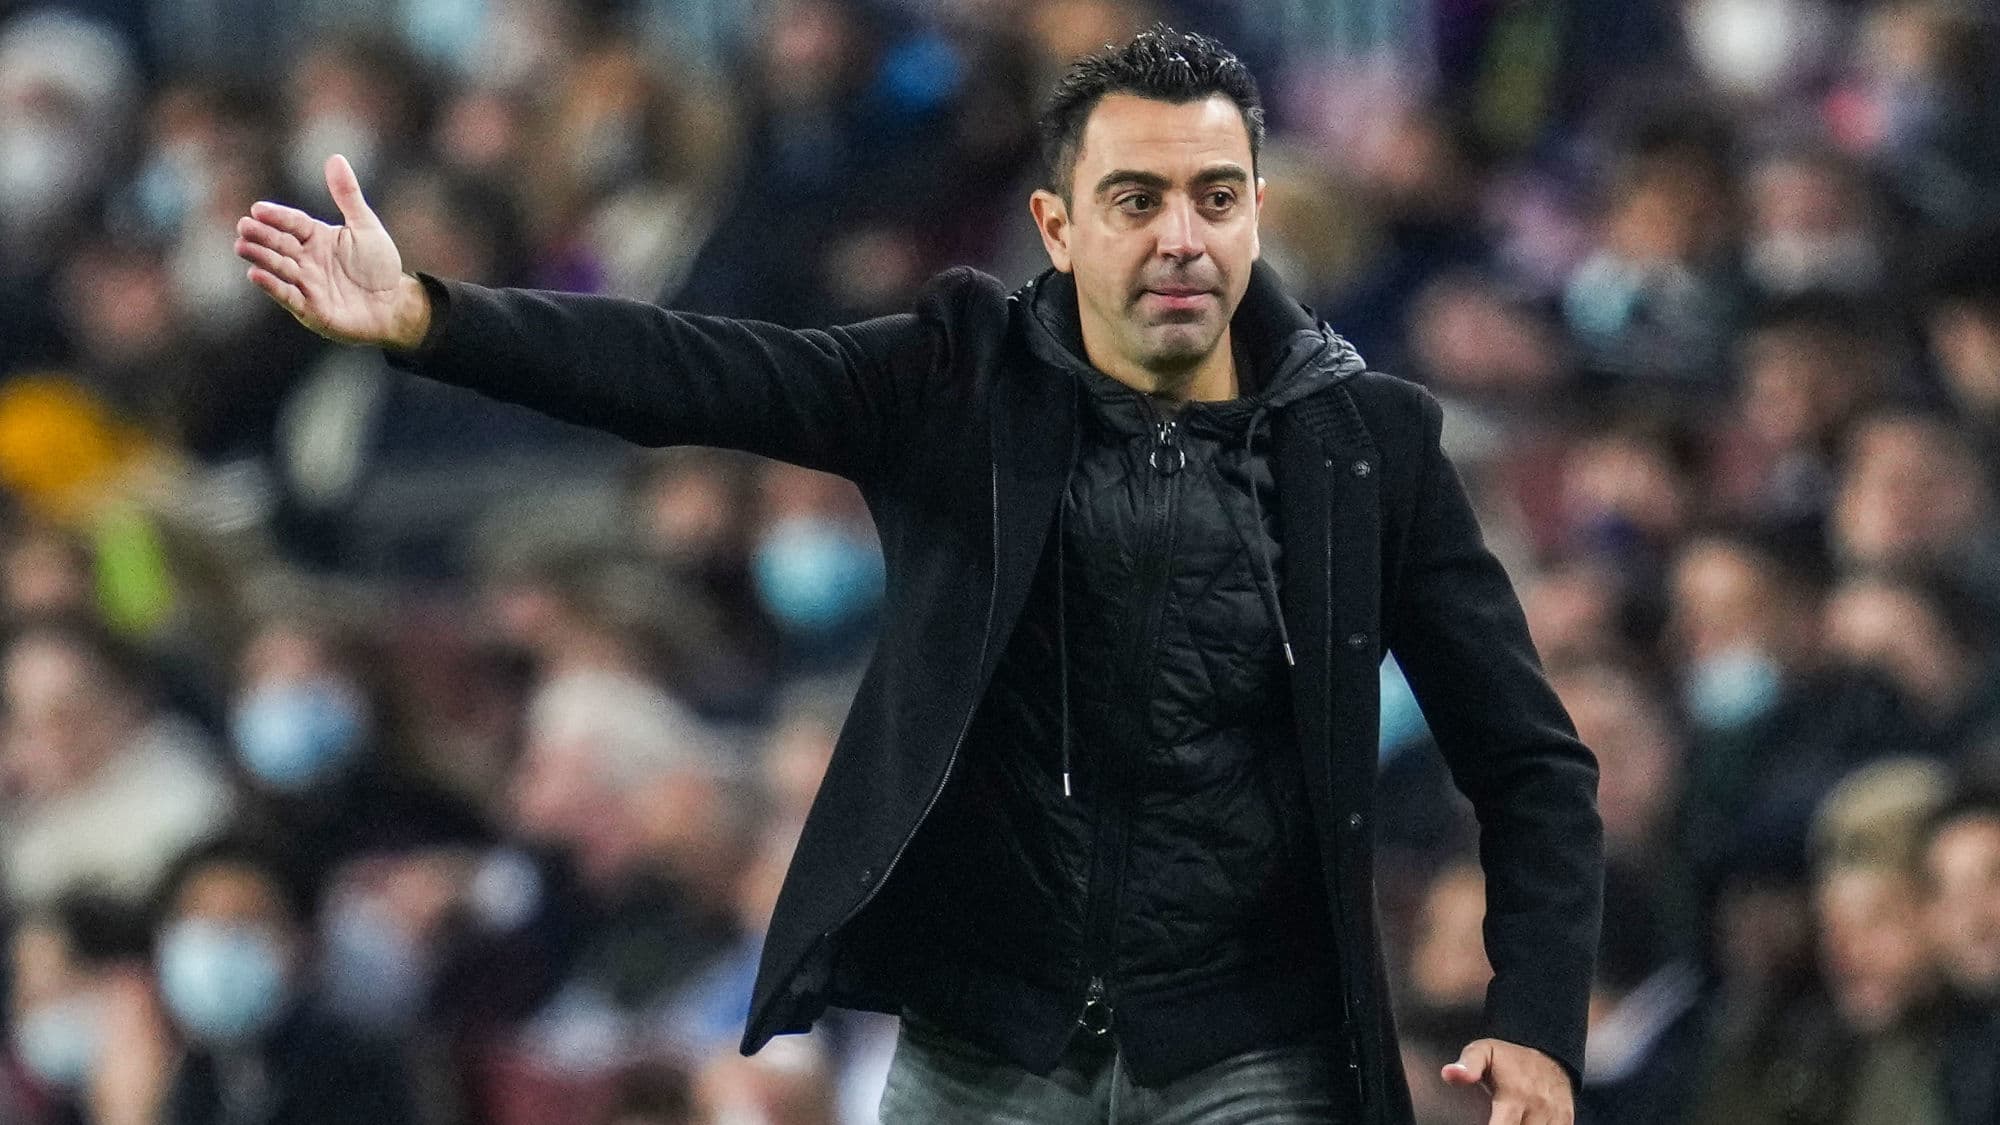 The tie that prevents Xavi from "sleeping"